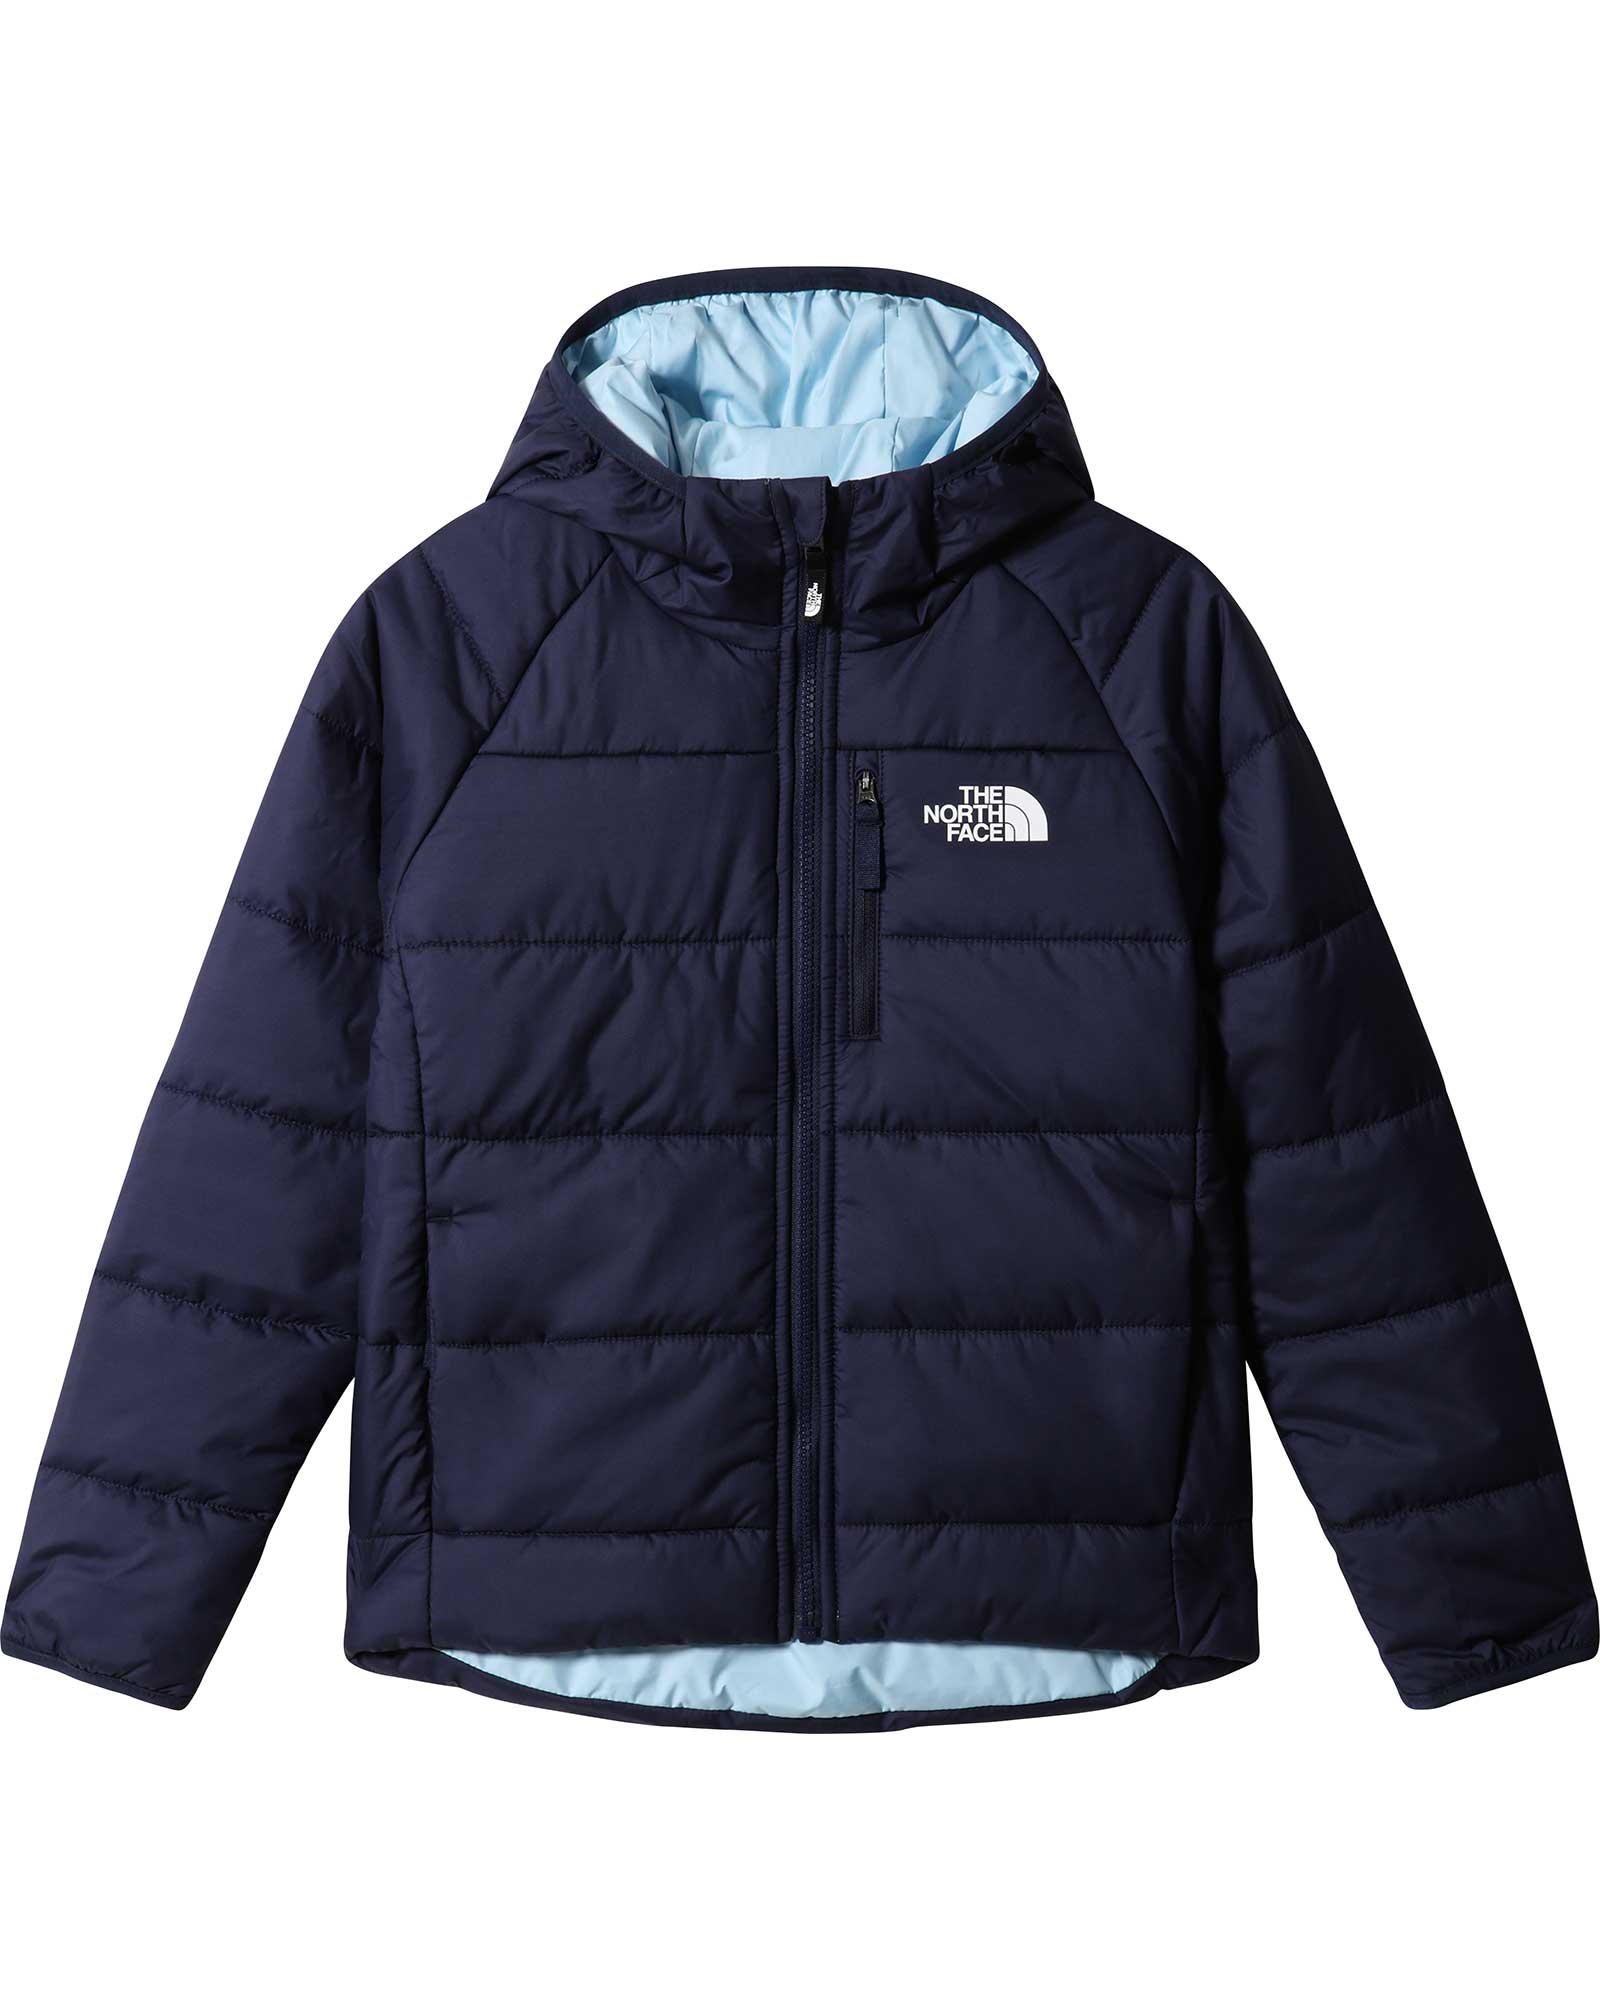 Product image of The North Face Reversible Perrito Girls' Jacket